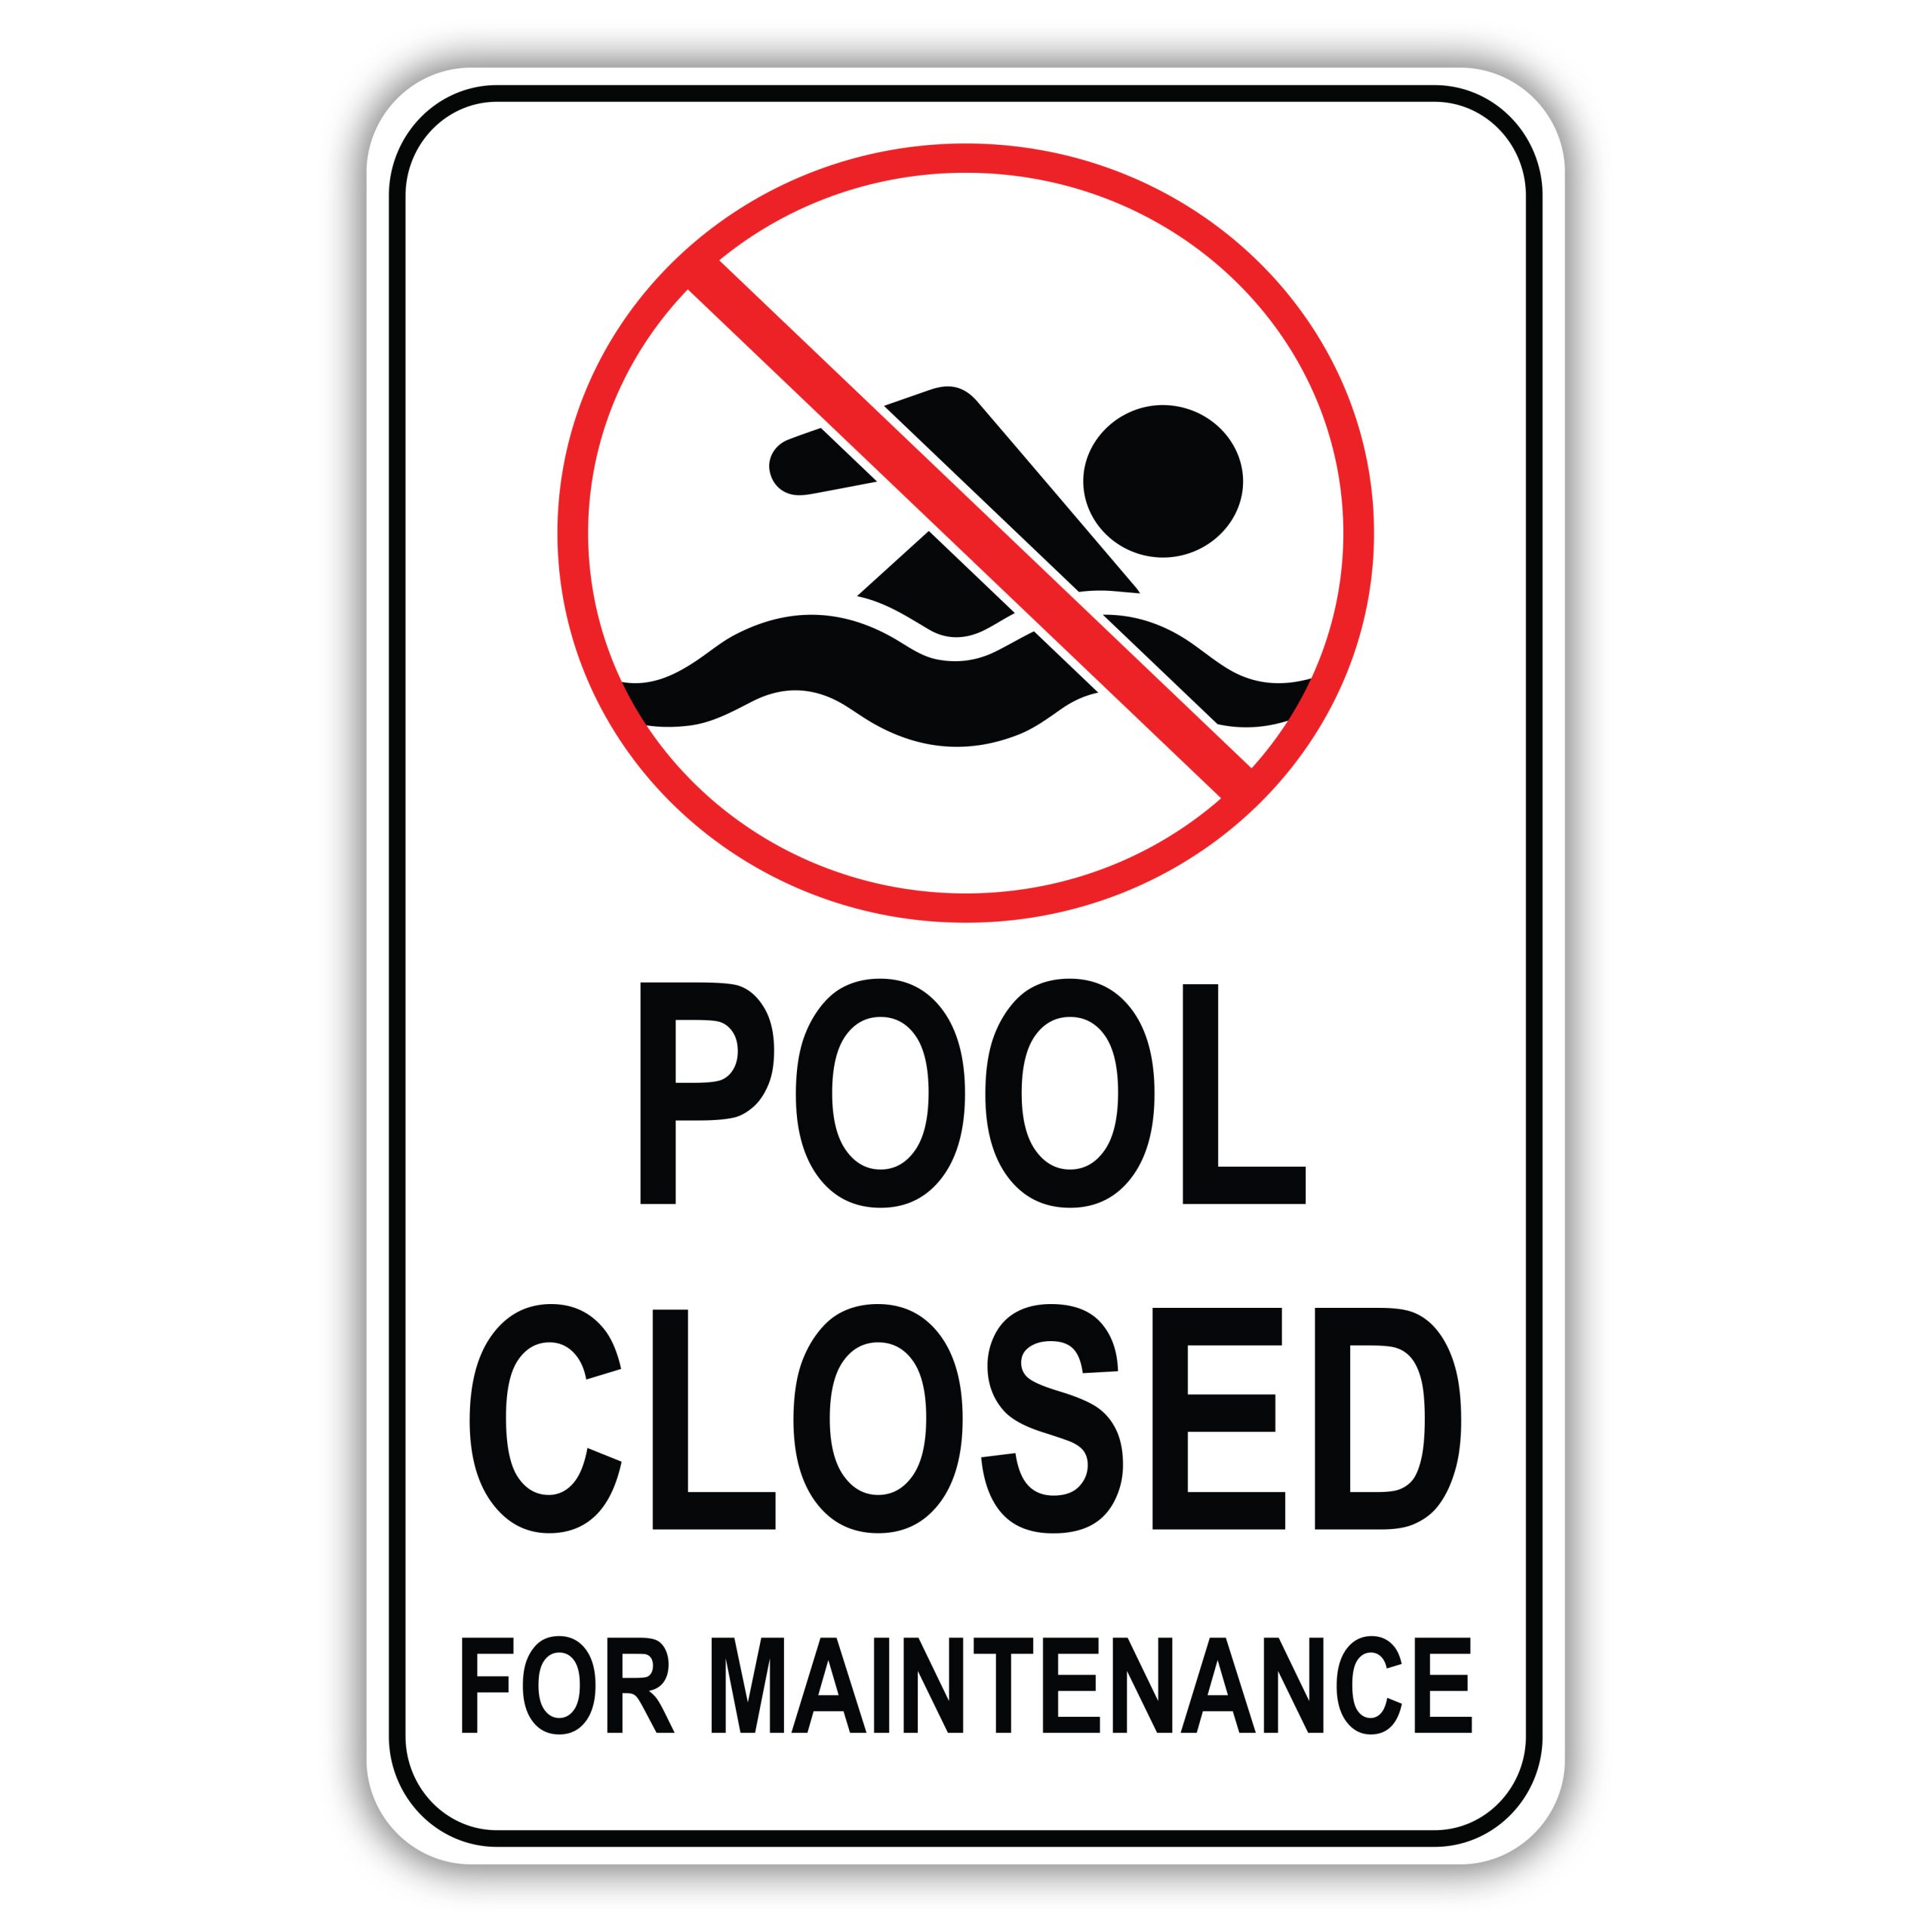 POOL CLOSED FOR MAINTENANCE American Sign Company